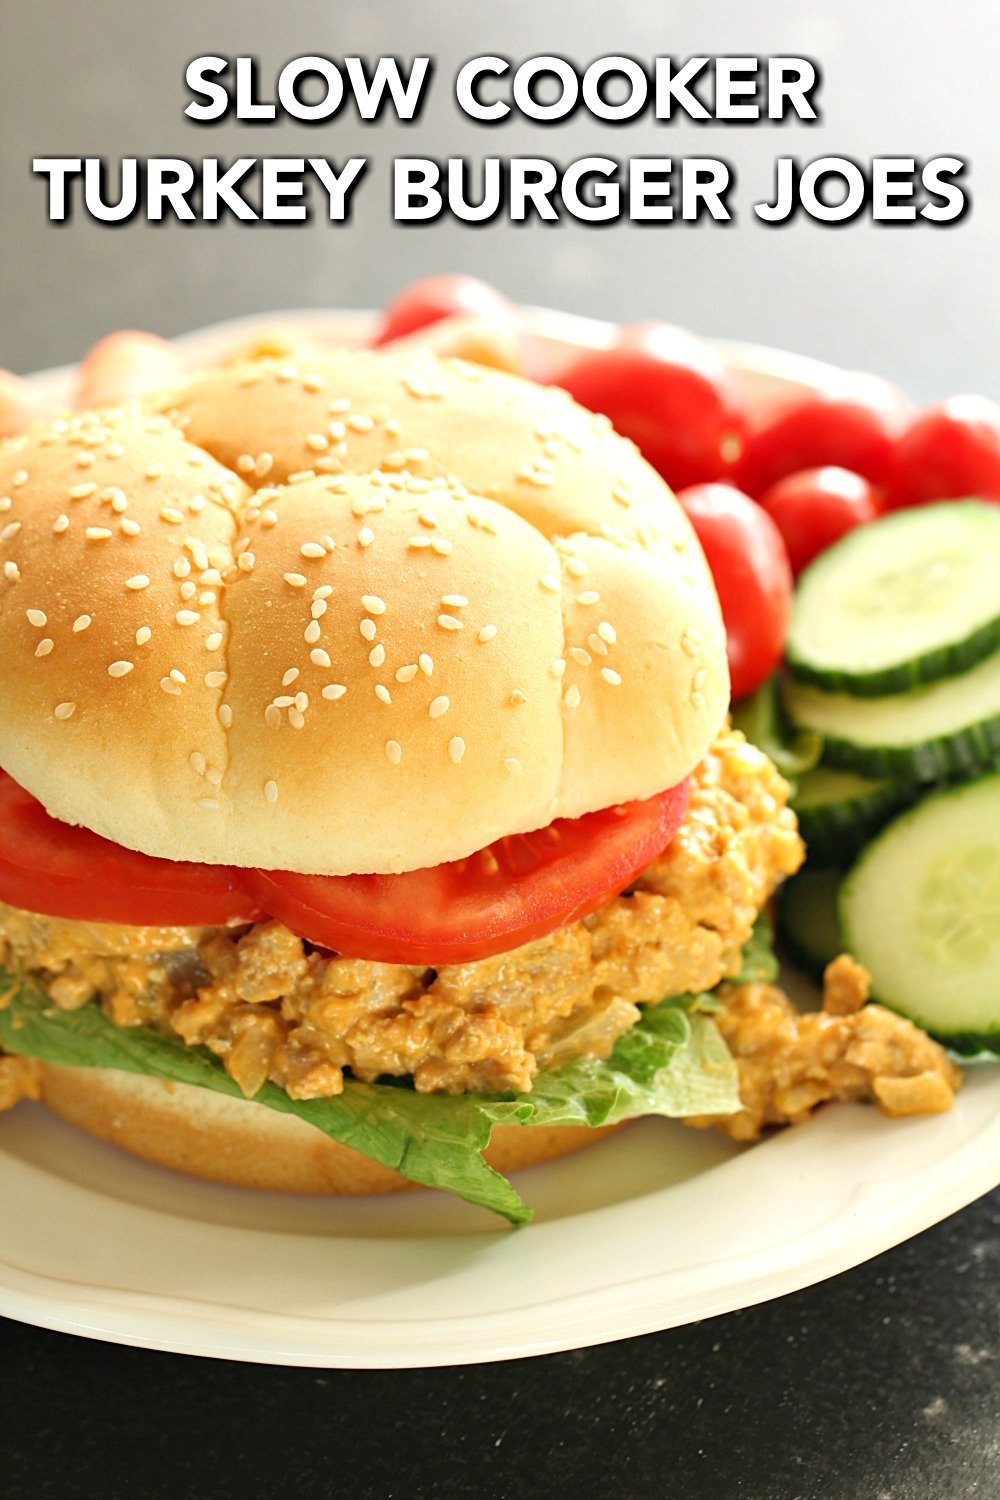 Slow Cooker Cheesy Turkey Burger Joes on a bun plated with vegetables